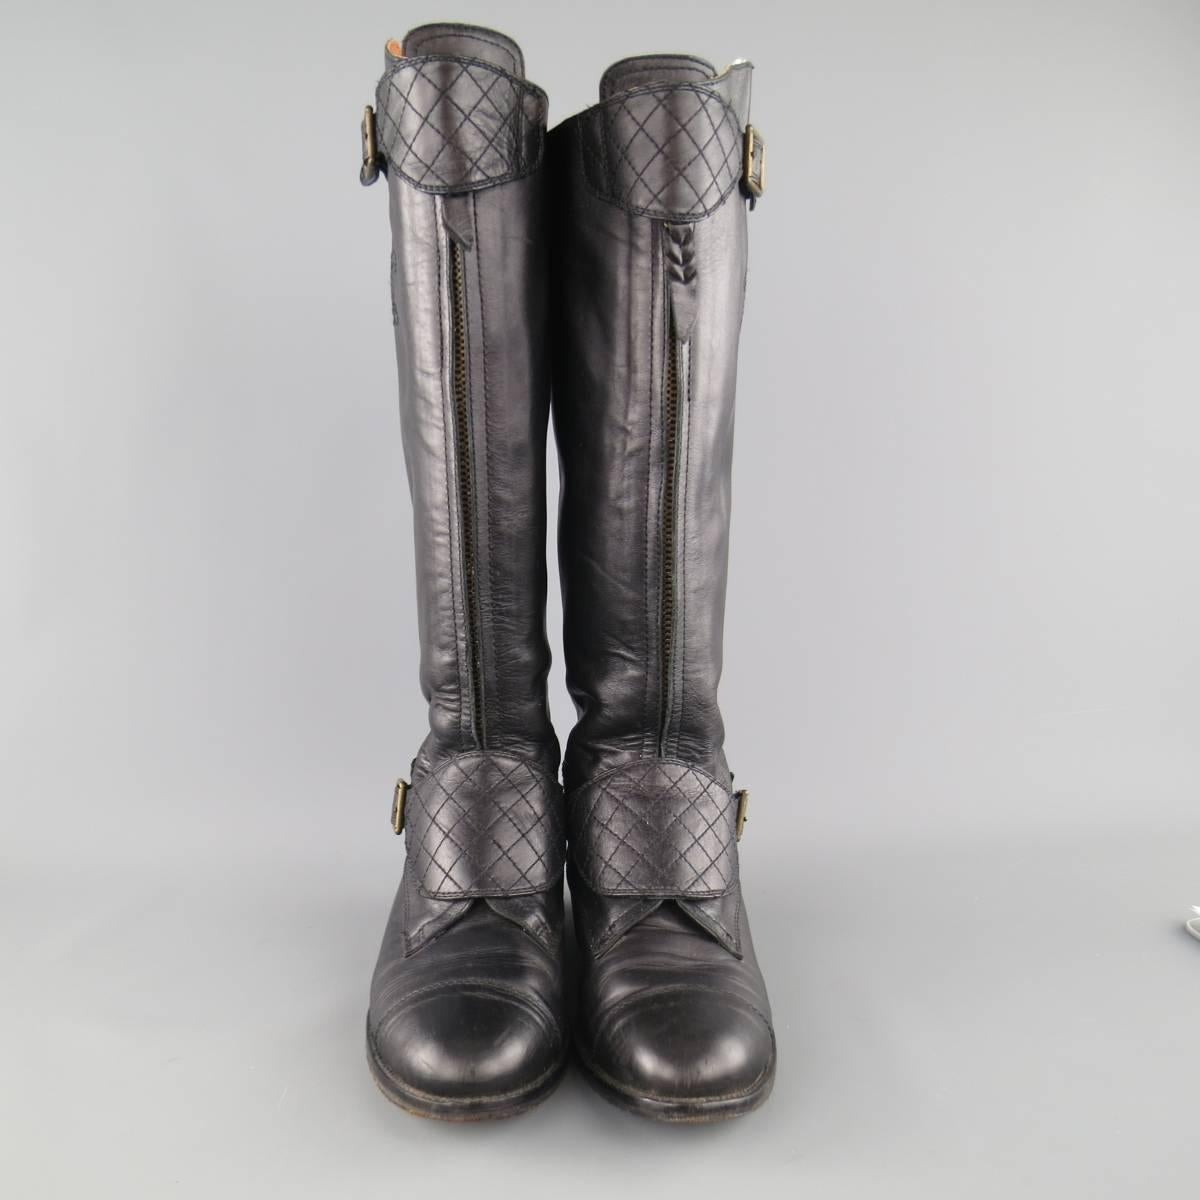 Vintage CHANEL riding boots come in smooth black leather and feature a round cap toe, quilted heel, tall zip front shaft with embroidered CC logo sides, and thick quilted straps with dark gold tone engraved buckles. Made in Italy.
 
Good Pre-Owned